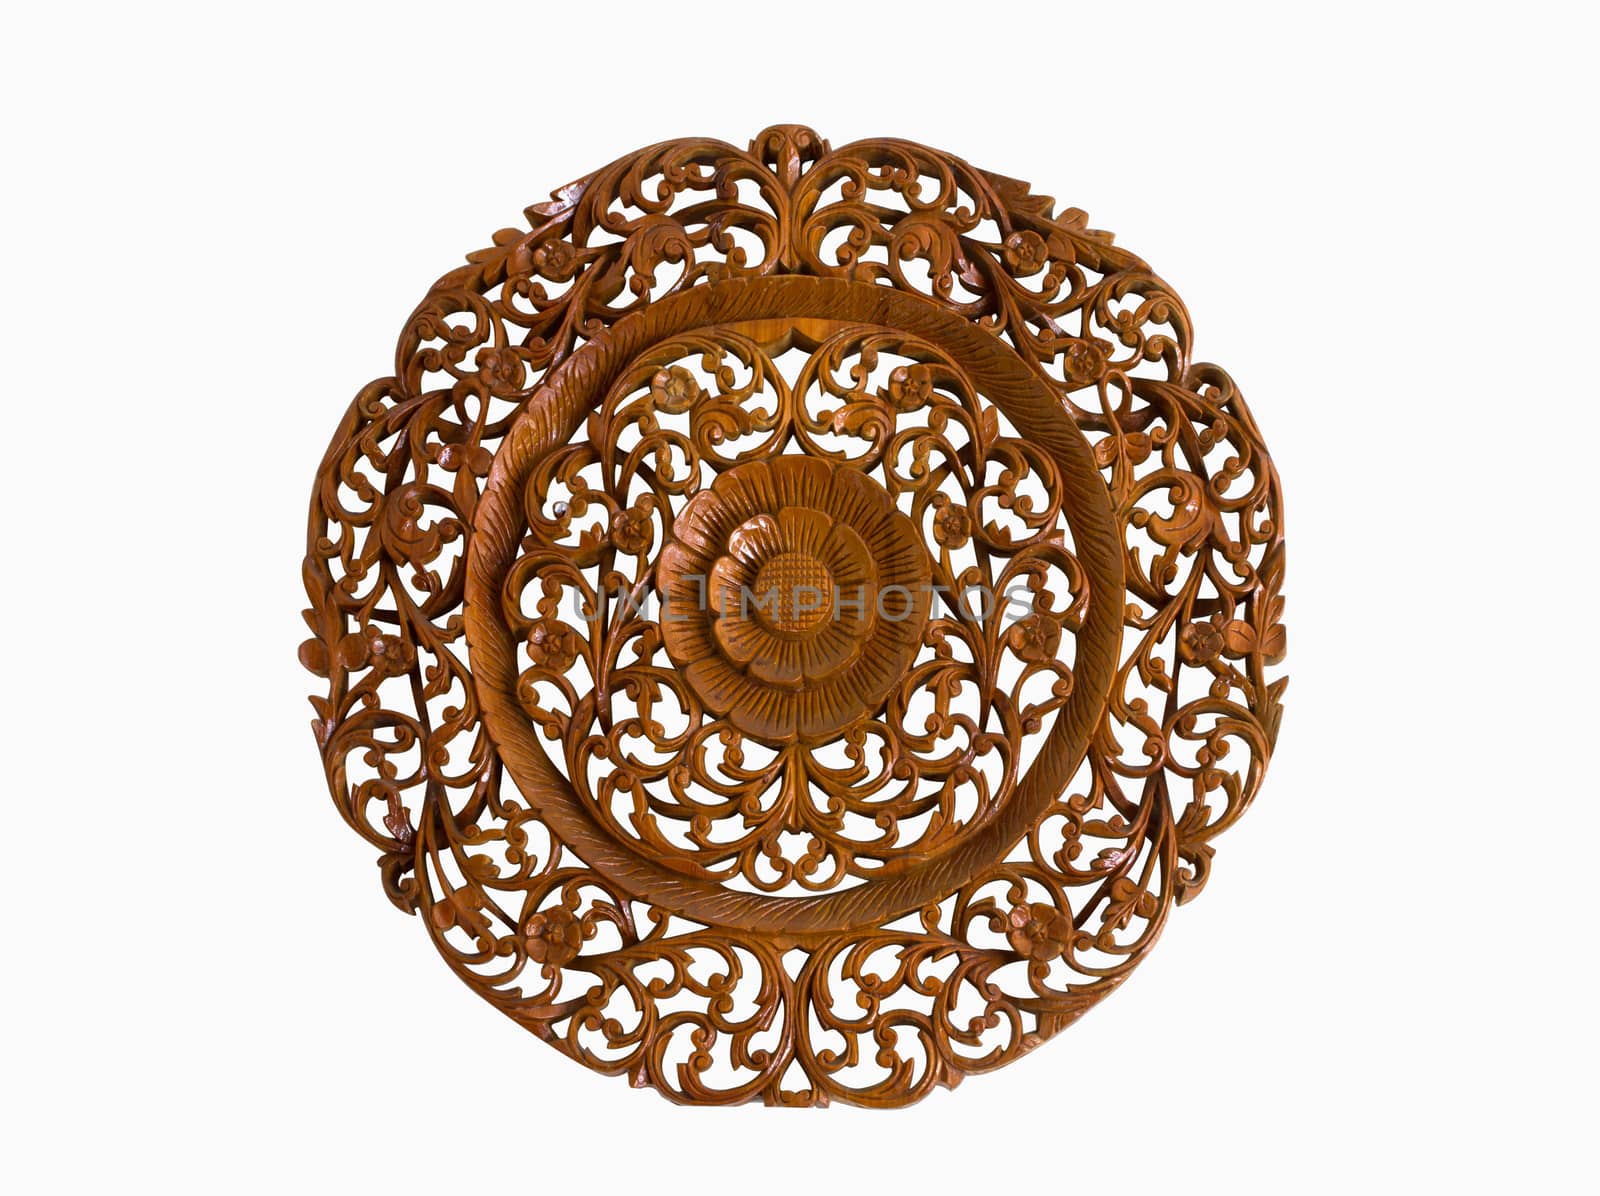 Pattern of flower carved on wood isolate background  by shutterbird